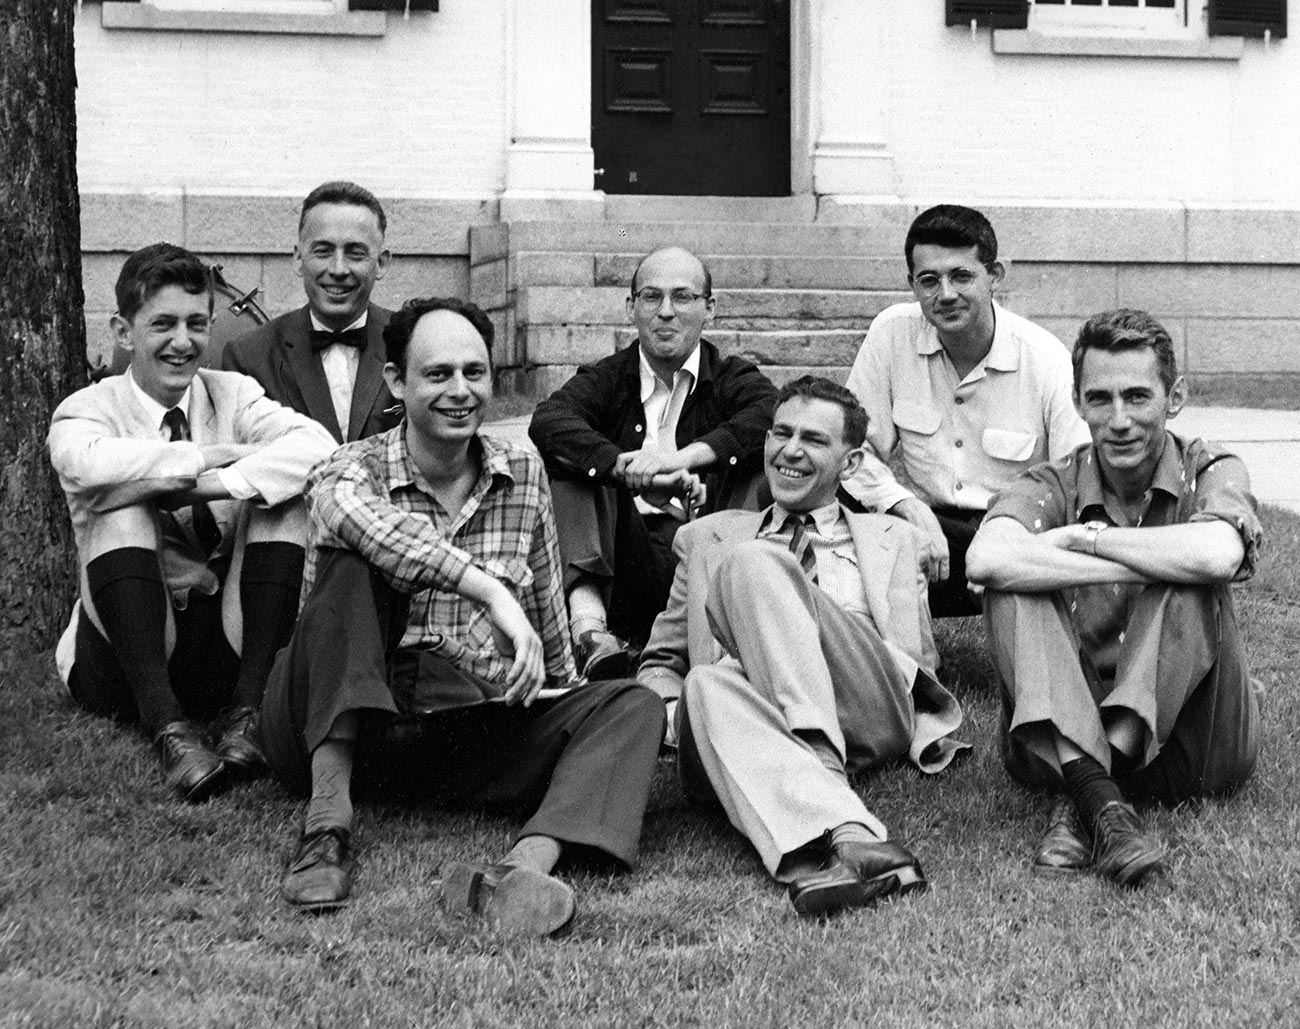 Marvin Minsky, Claude Shannon, Ray Solomonoff and other scientists at the Dartmouth Summer Research Project on Artificial Intelligence (1955)